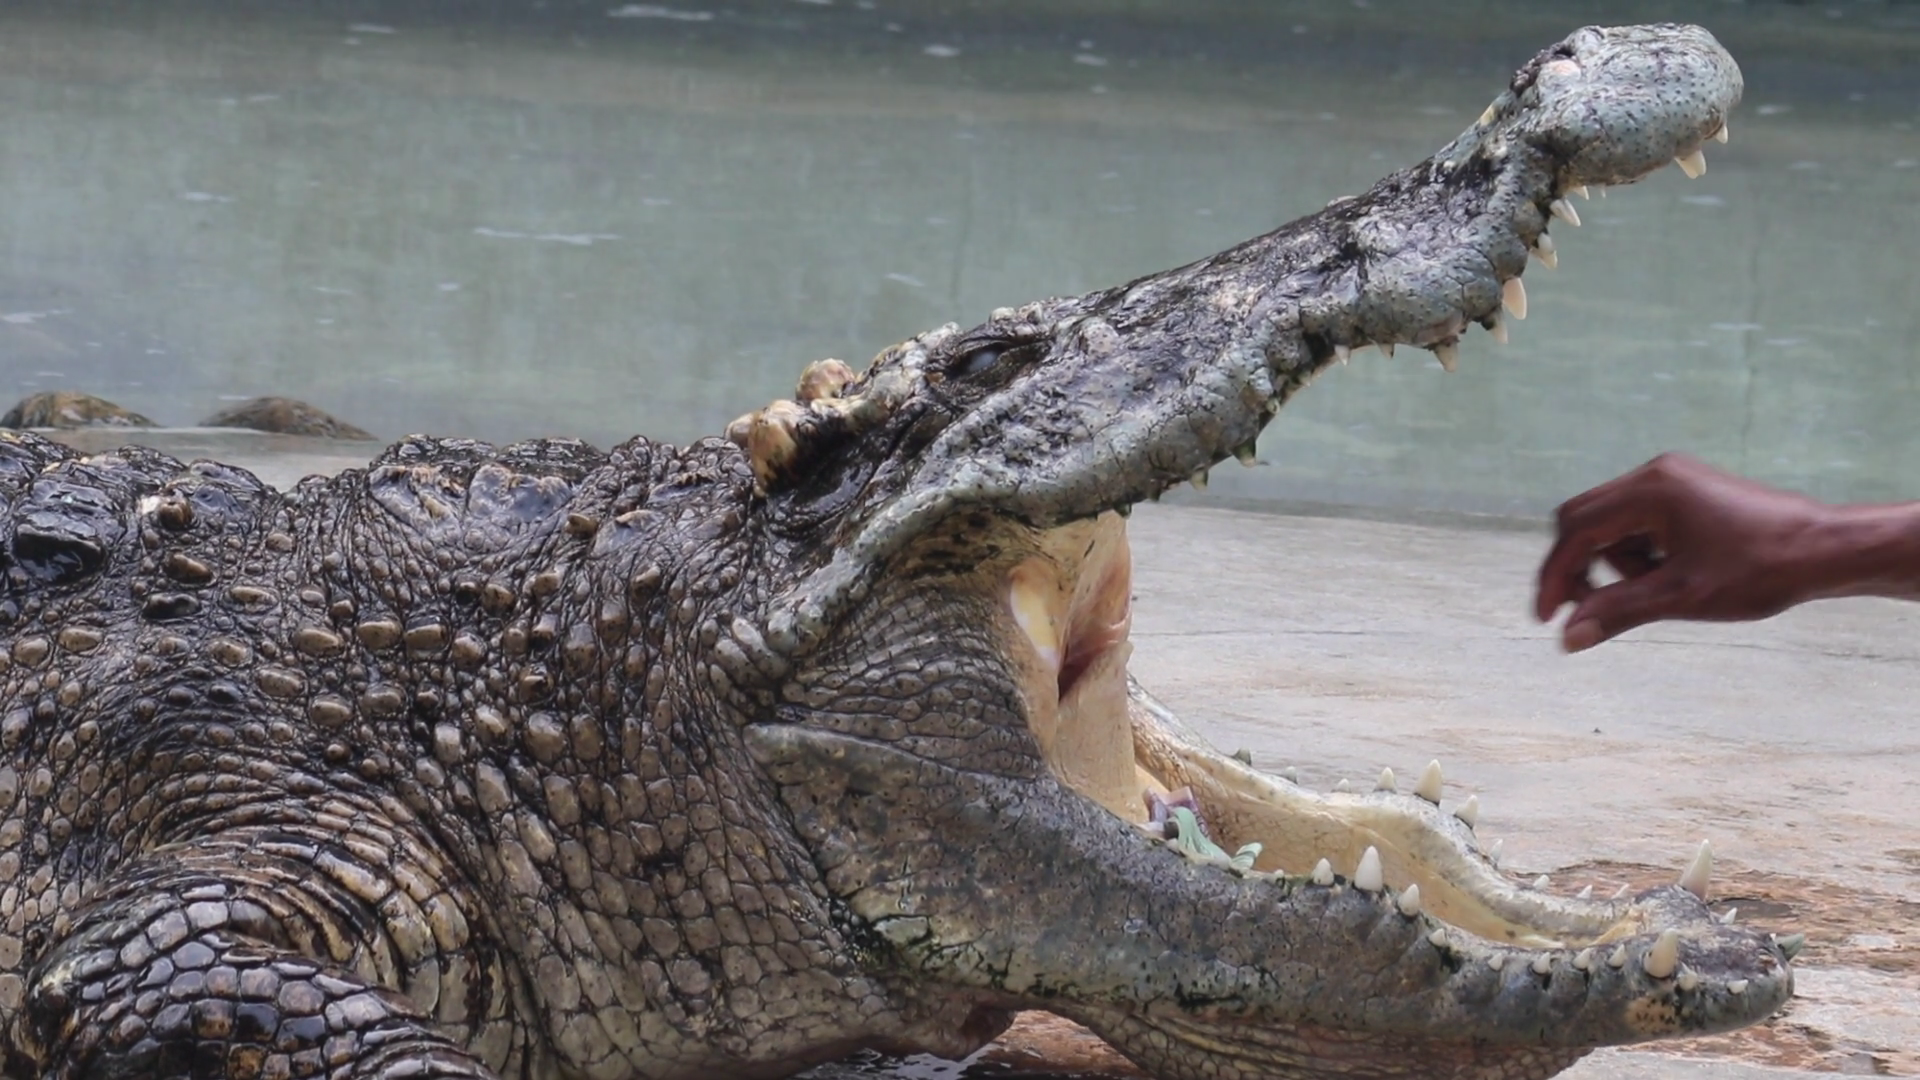 man sticking his hand into the mouth of a crocodile and takes the ...